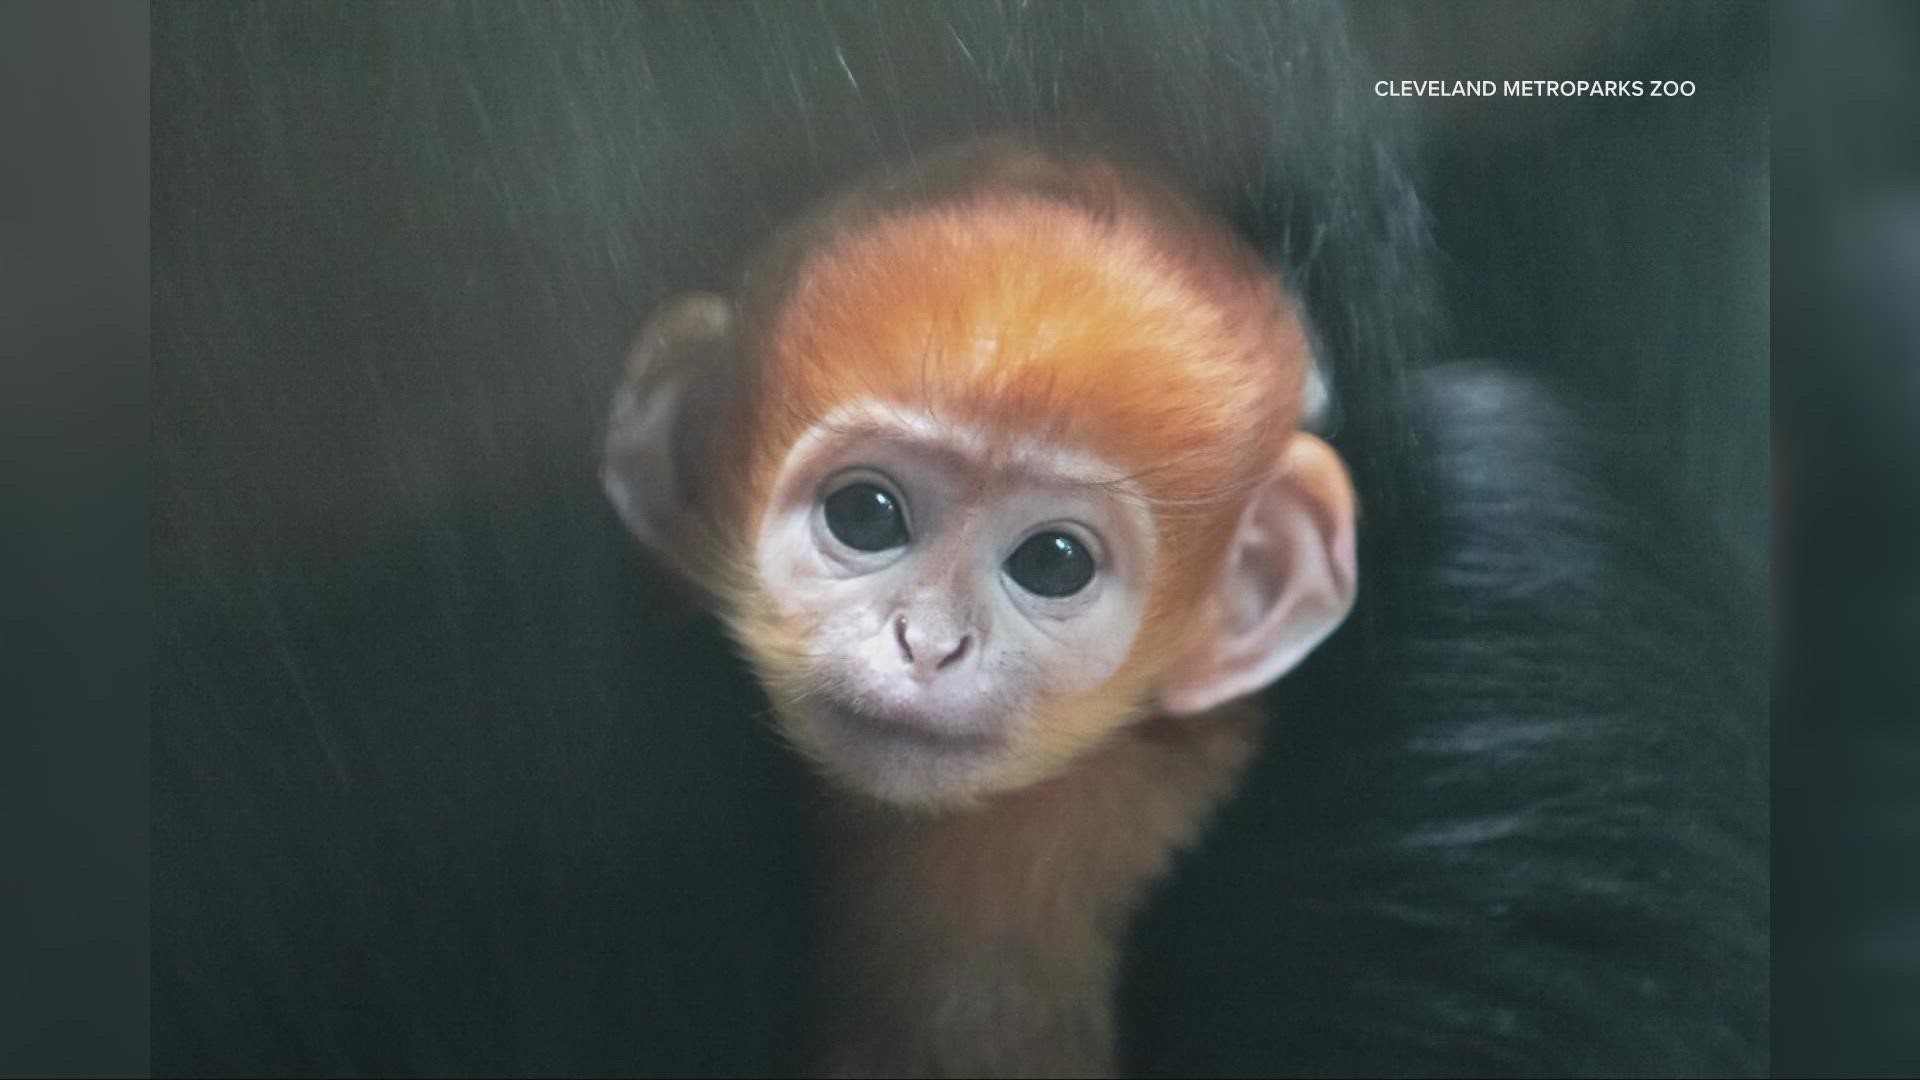 The zoo announced the birth on Facebook. The François' langur monkey was born on July 16.